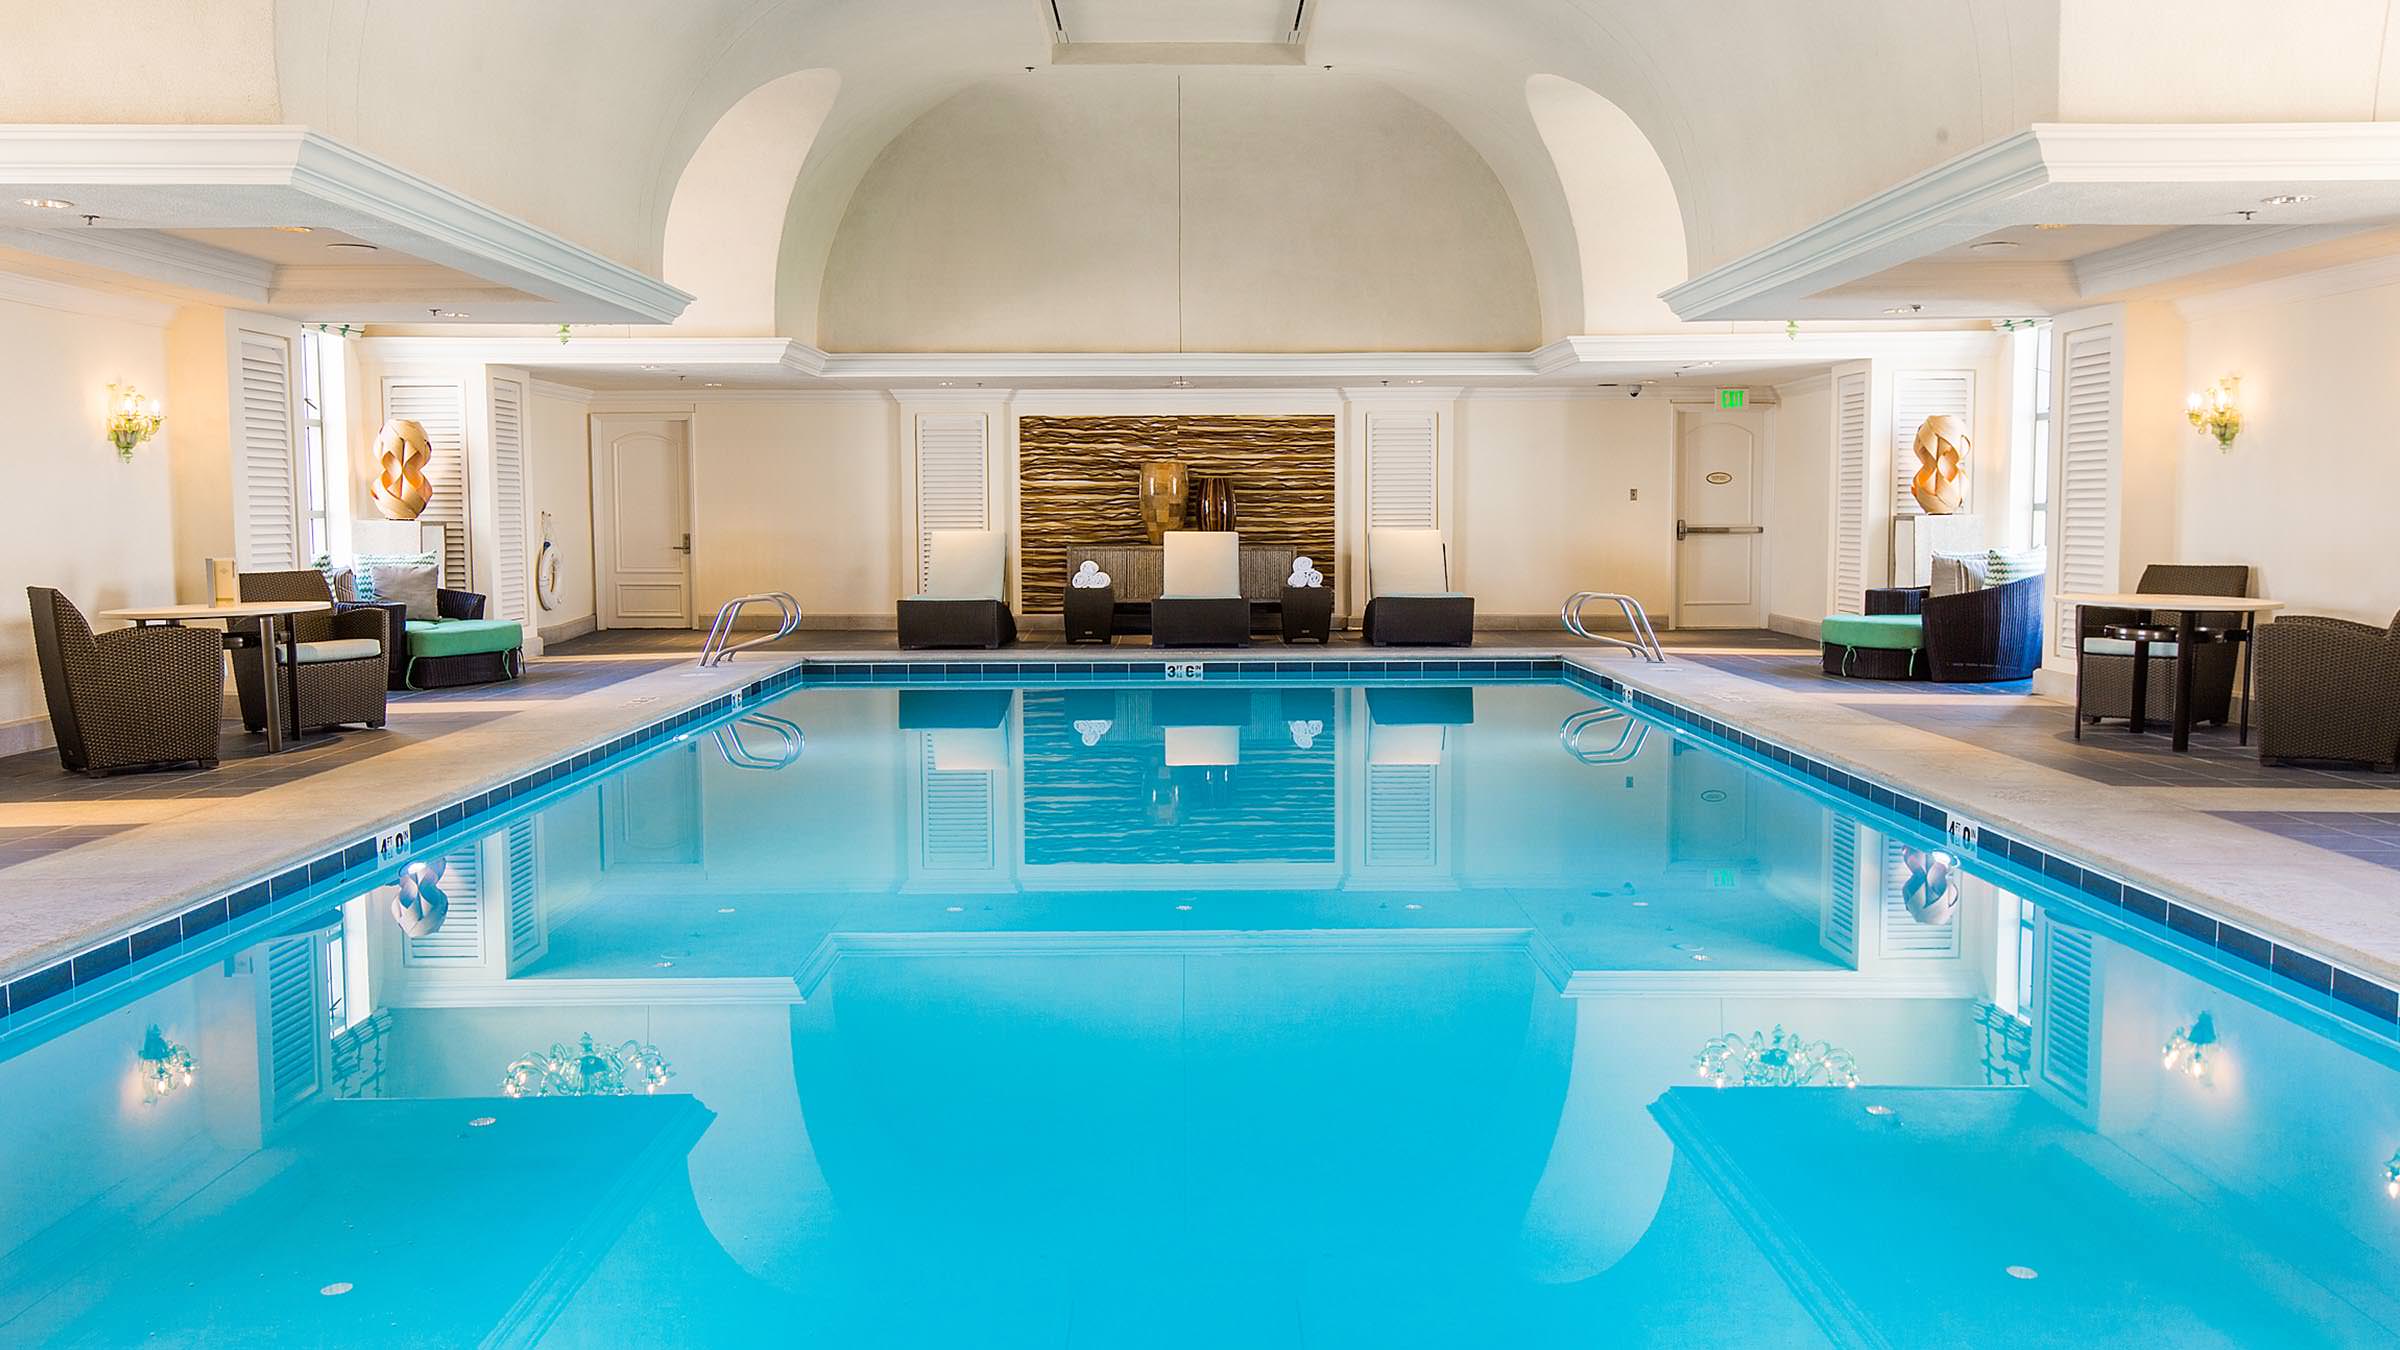 The Grand Spa's Indoor Pool featuring arched ceilings and Italian chandeliers.